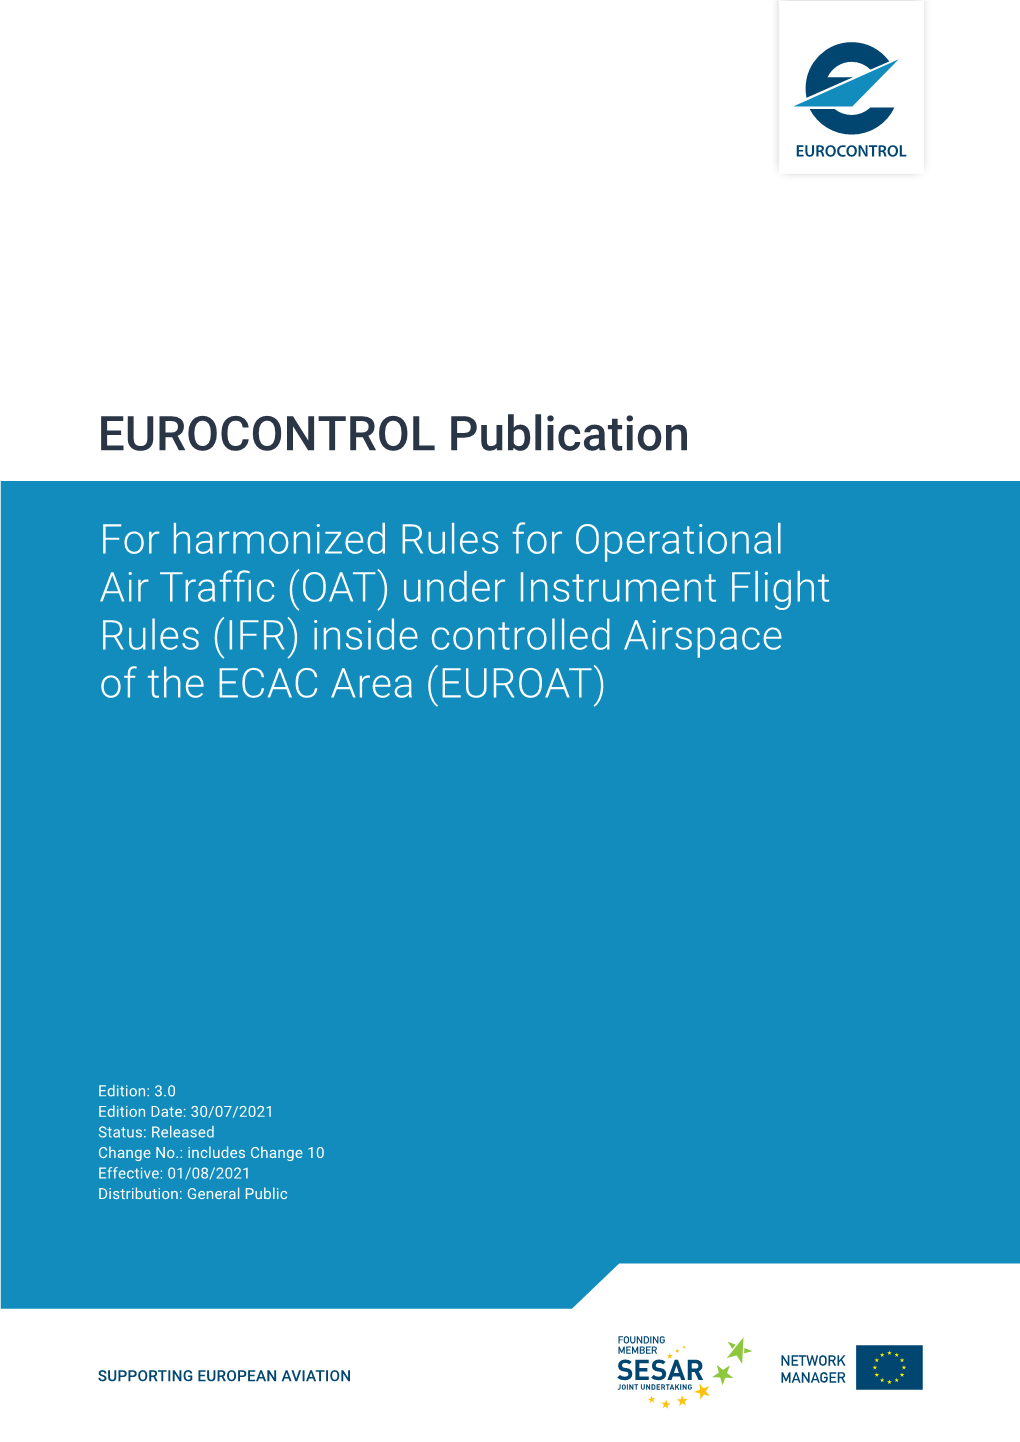 IFR) Inside Controlled Airspace of the ECAC Area (EUROAT)